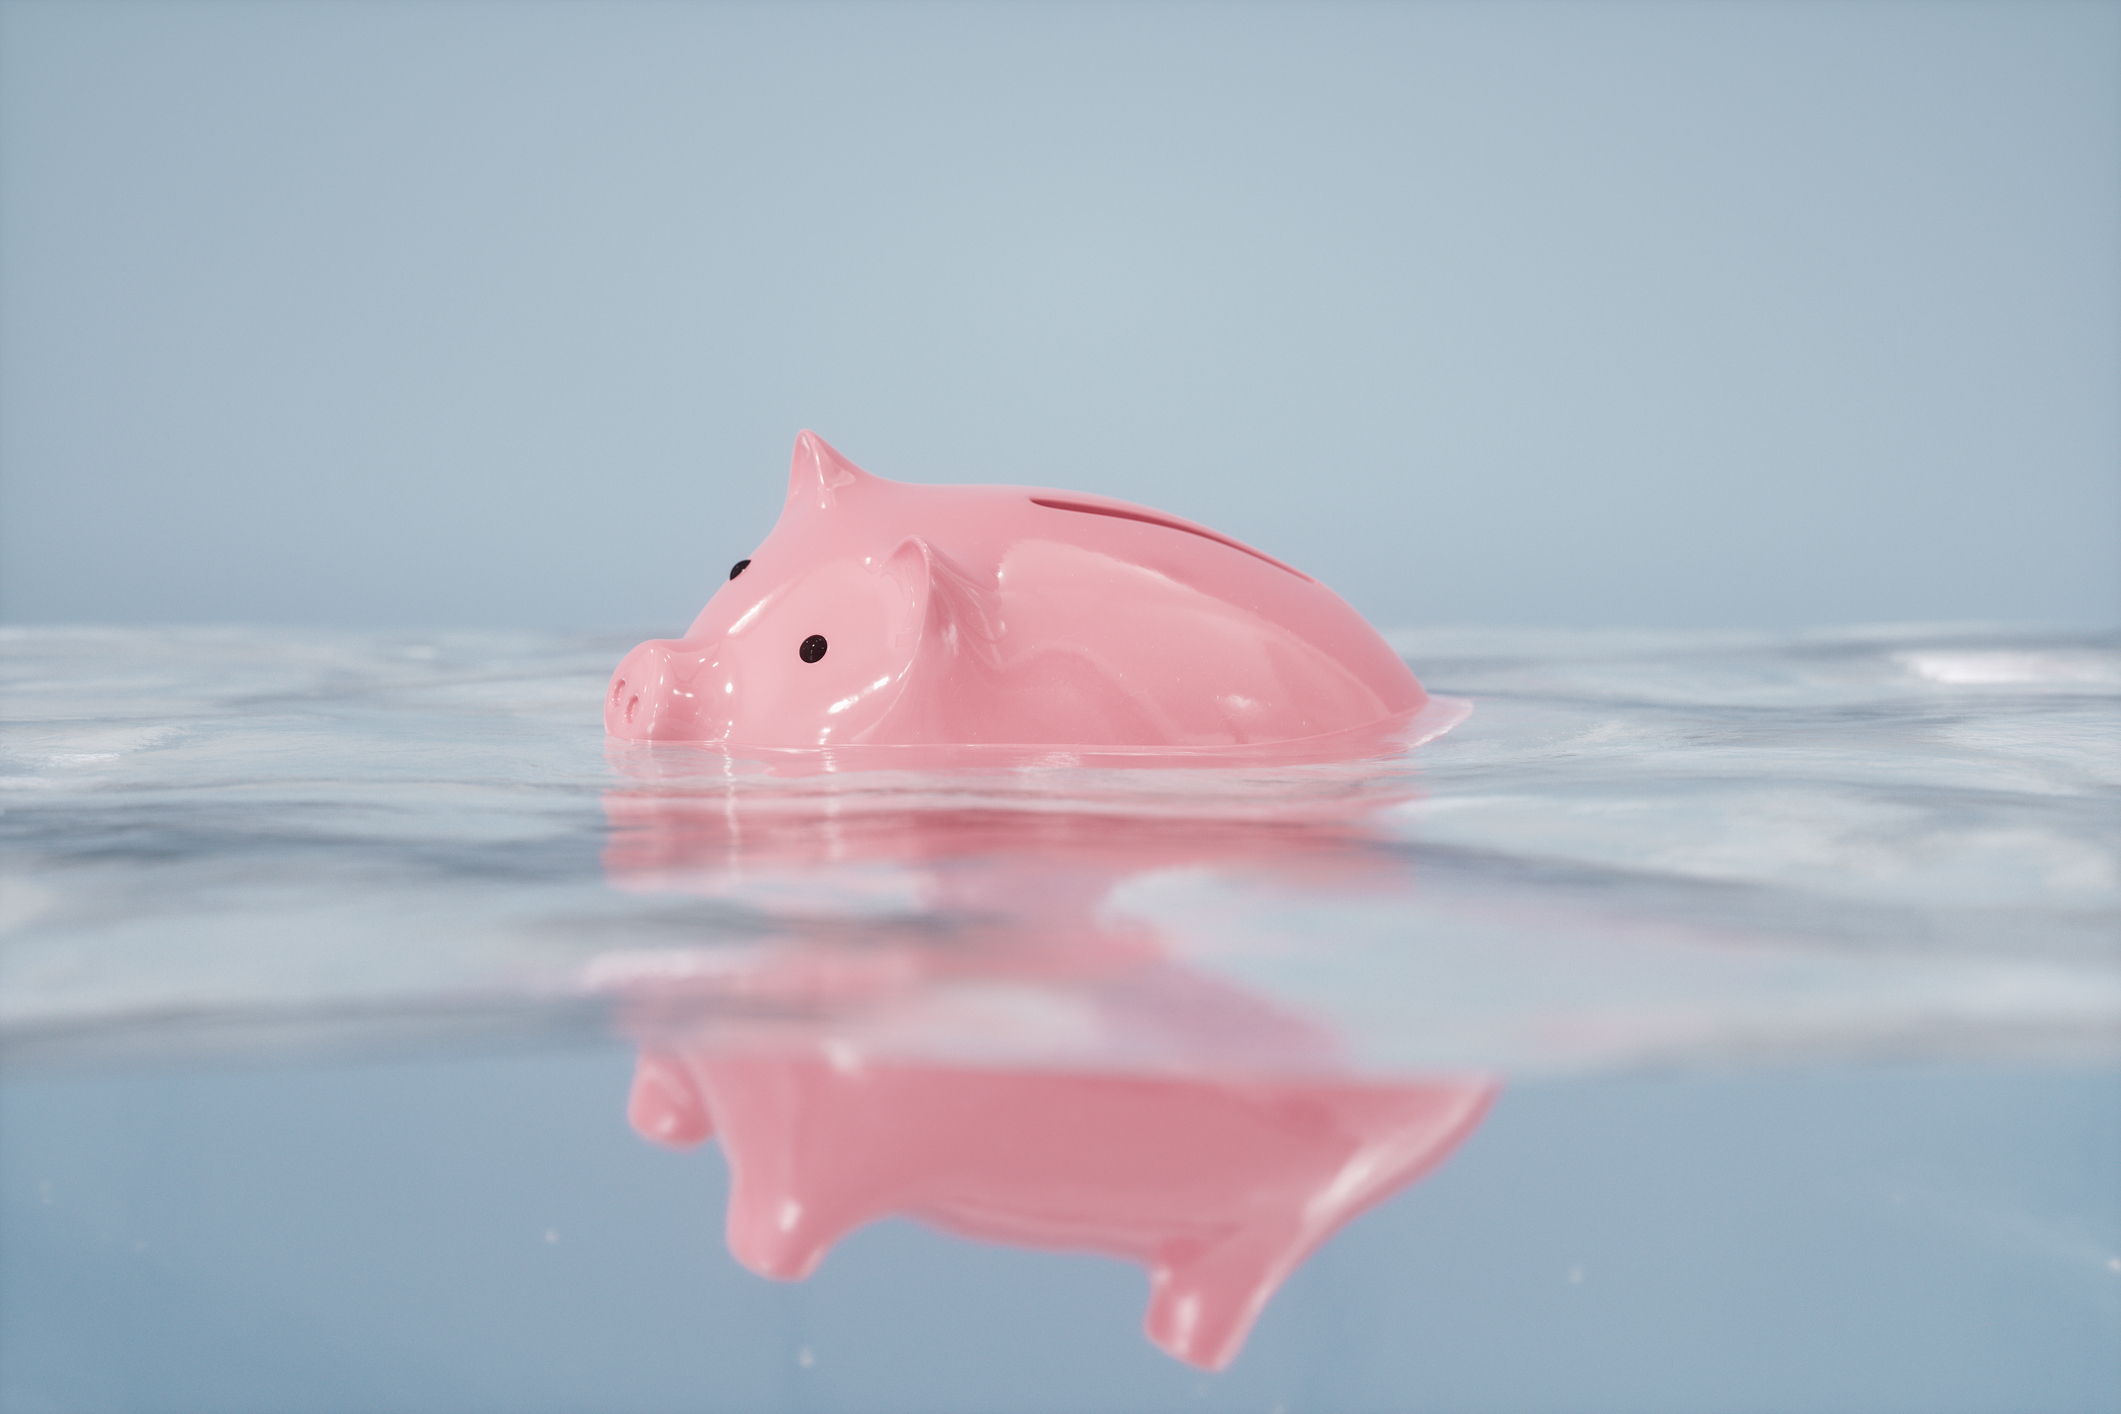 Sinking piggy bank in the water.